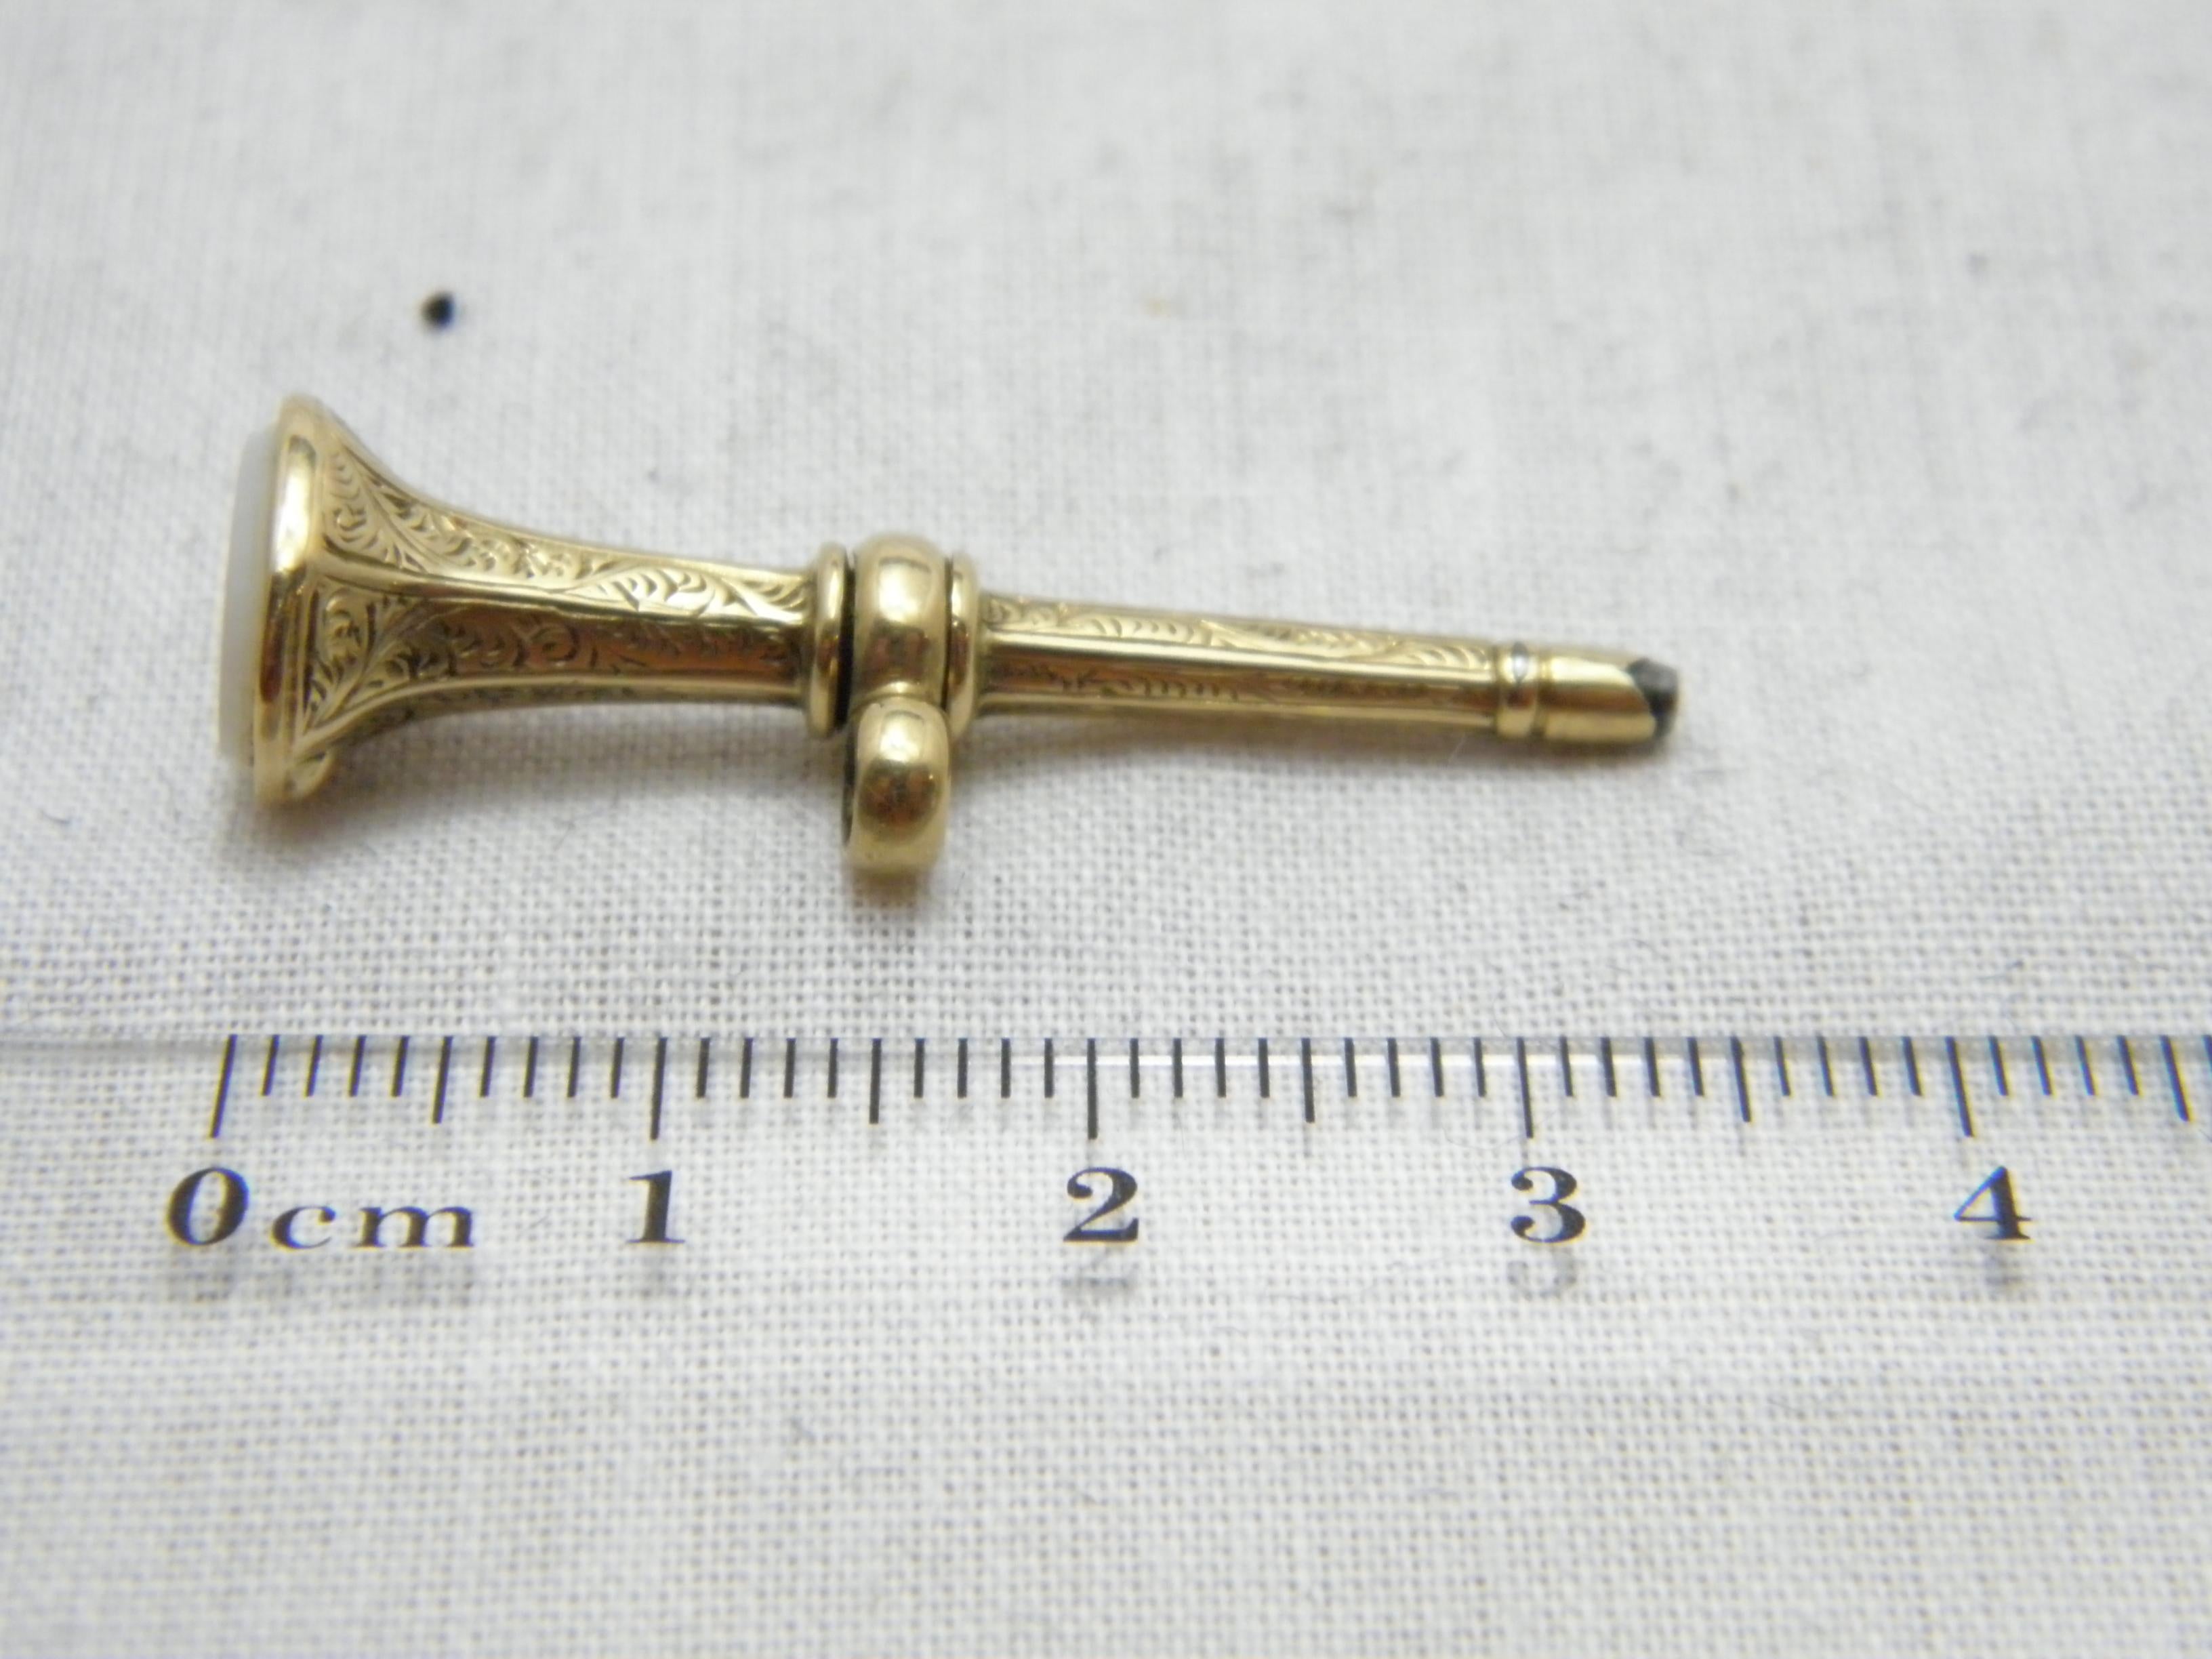 Antique 15ct Gold Large Pocket Watch Key Fob c1850 625 Purity Heavy 3.1g For Sale 5